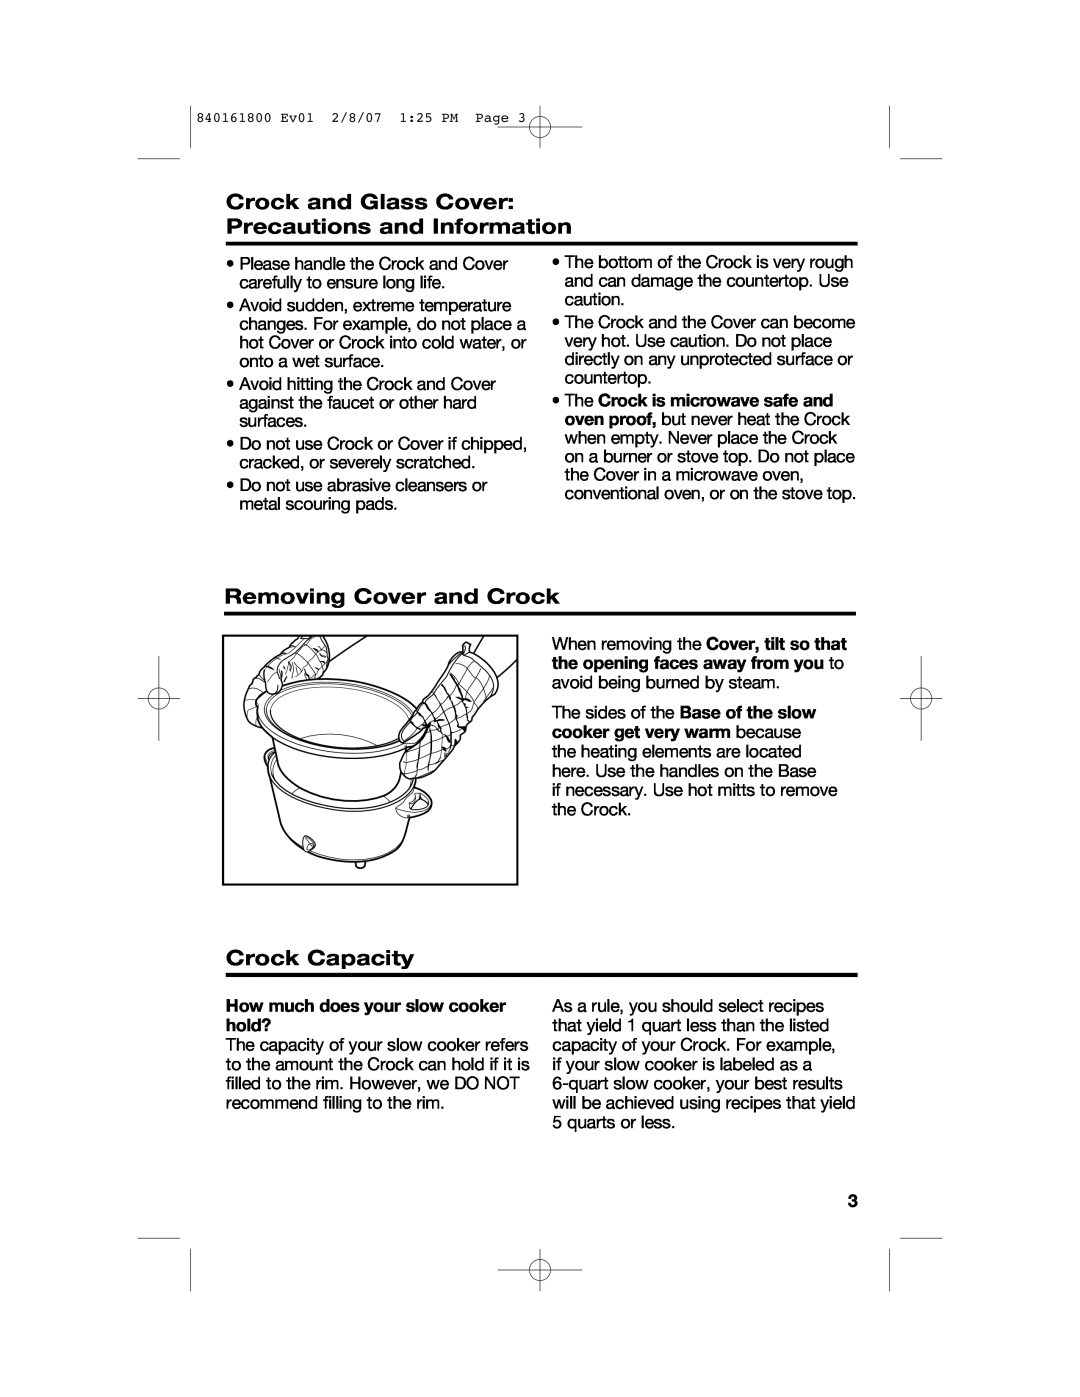 Hamilton Beach 840161800 manual Crock and Glass Cover Precautions and Information, Removing Cover and Crock, Crock Capacity 